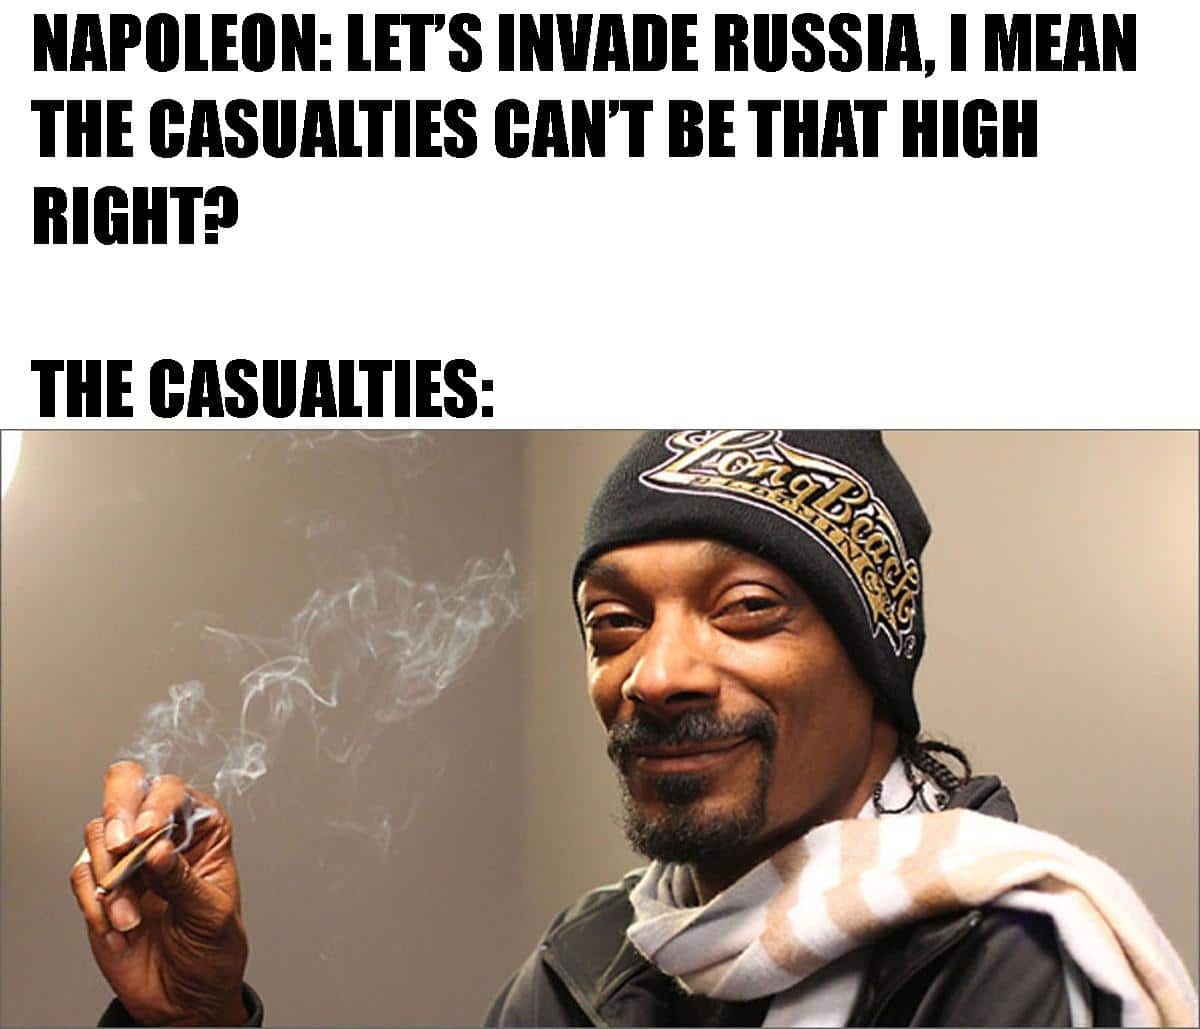 History, Russia, Russians, Russian, French, Nice History Memes History, Russia, Russians, Russian, French, Nice text: NAPOLEON: LET'S INVADE RUSSIA, MEAN THE CASUALTIES CAN'T BE THAT HIGH THE CASUALTIES: 